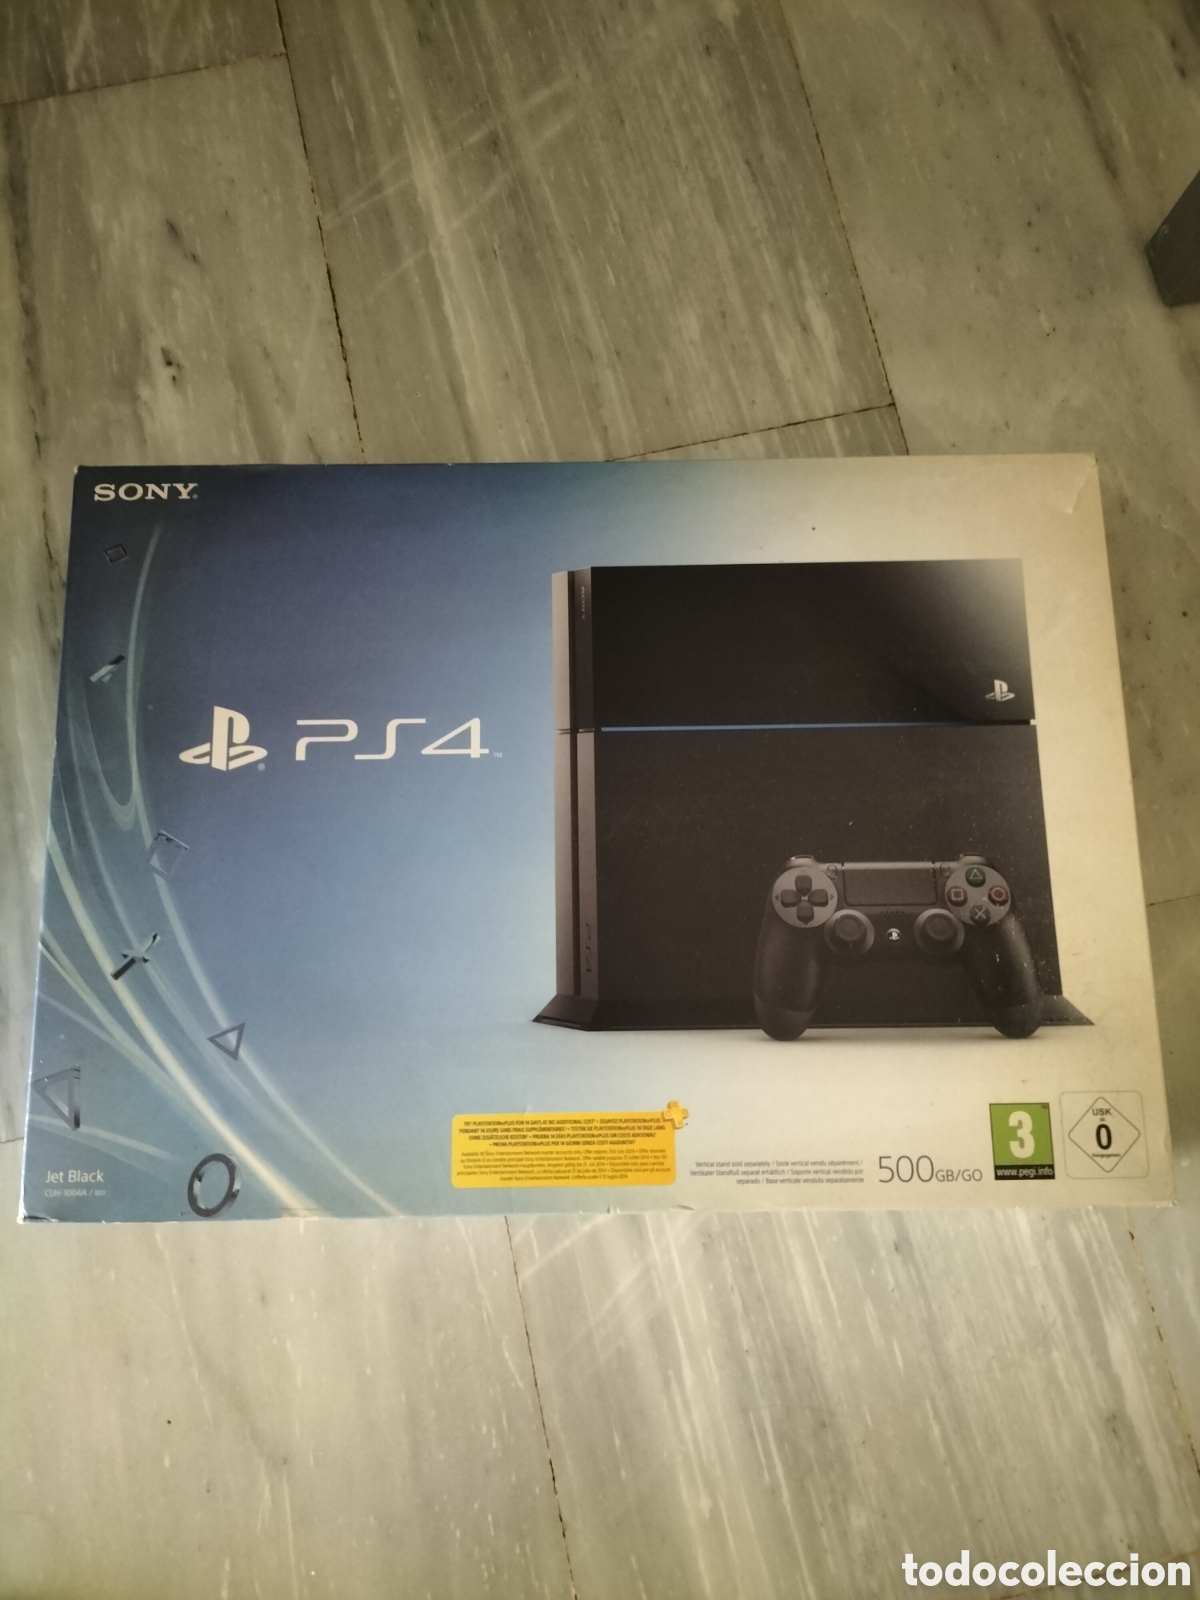 caja consola ps4 - Buy Video games and consoles PS4 on todocoleccion